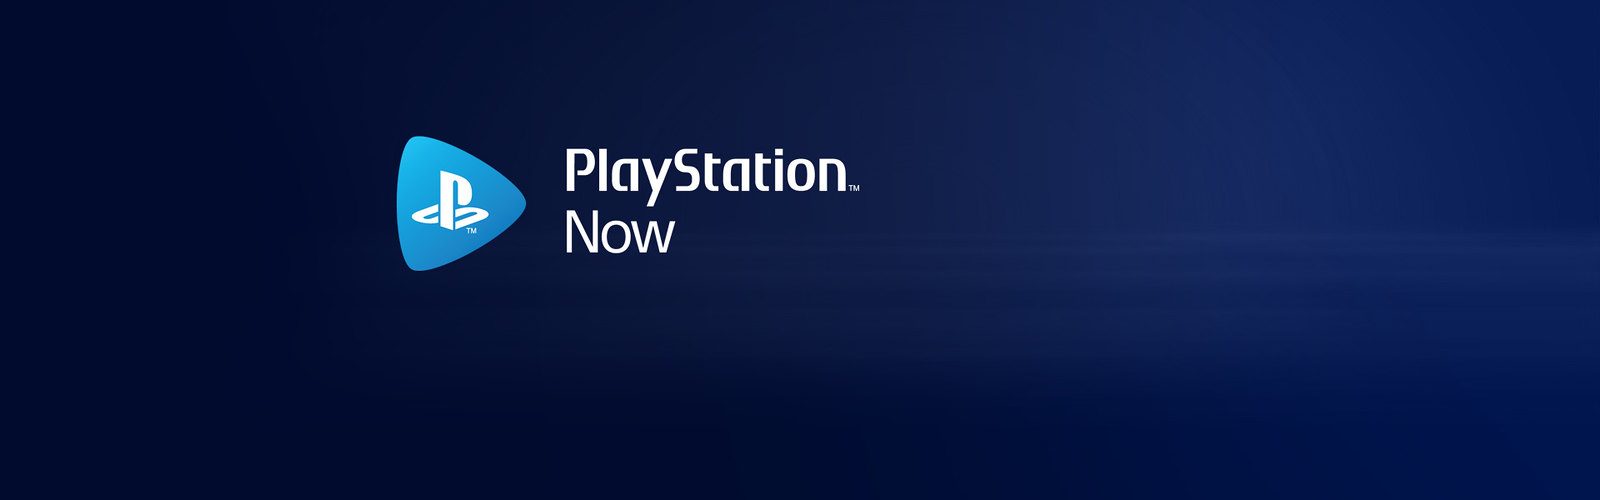 ps now october 2019